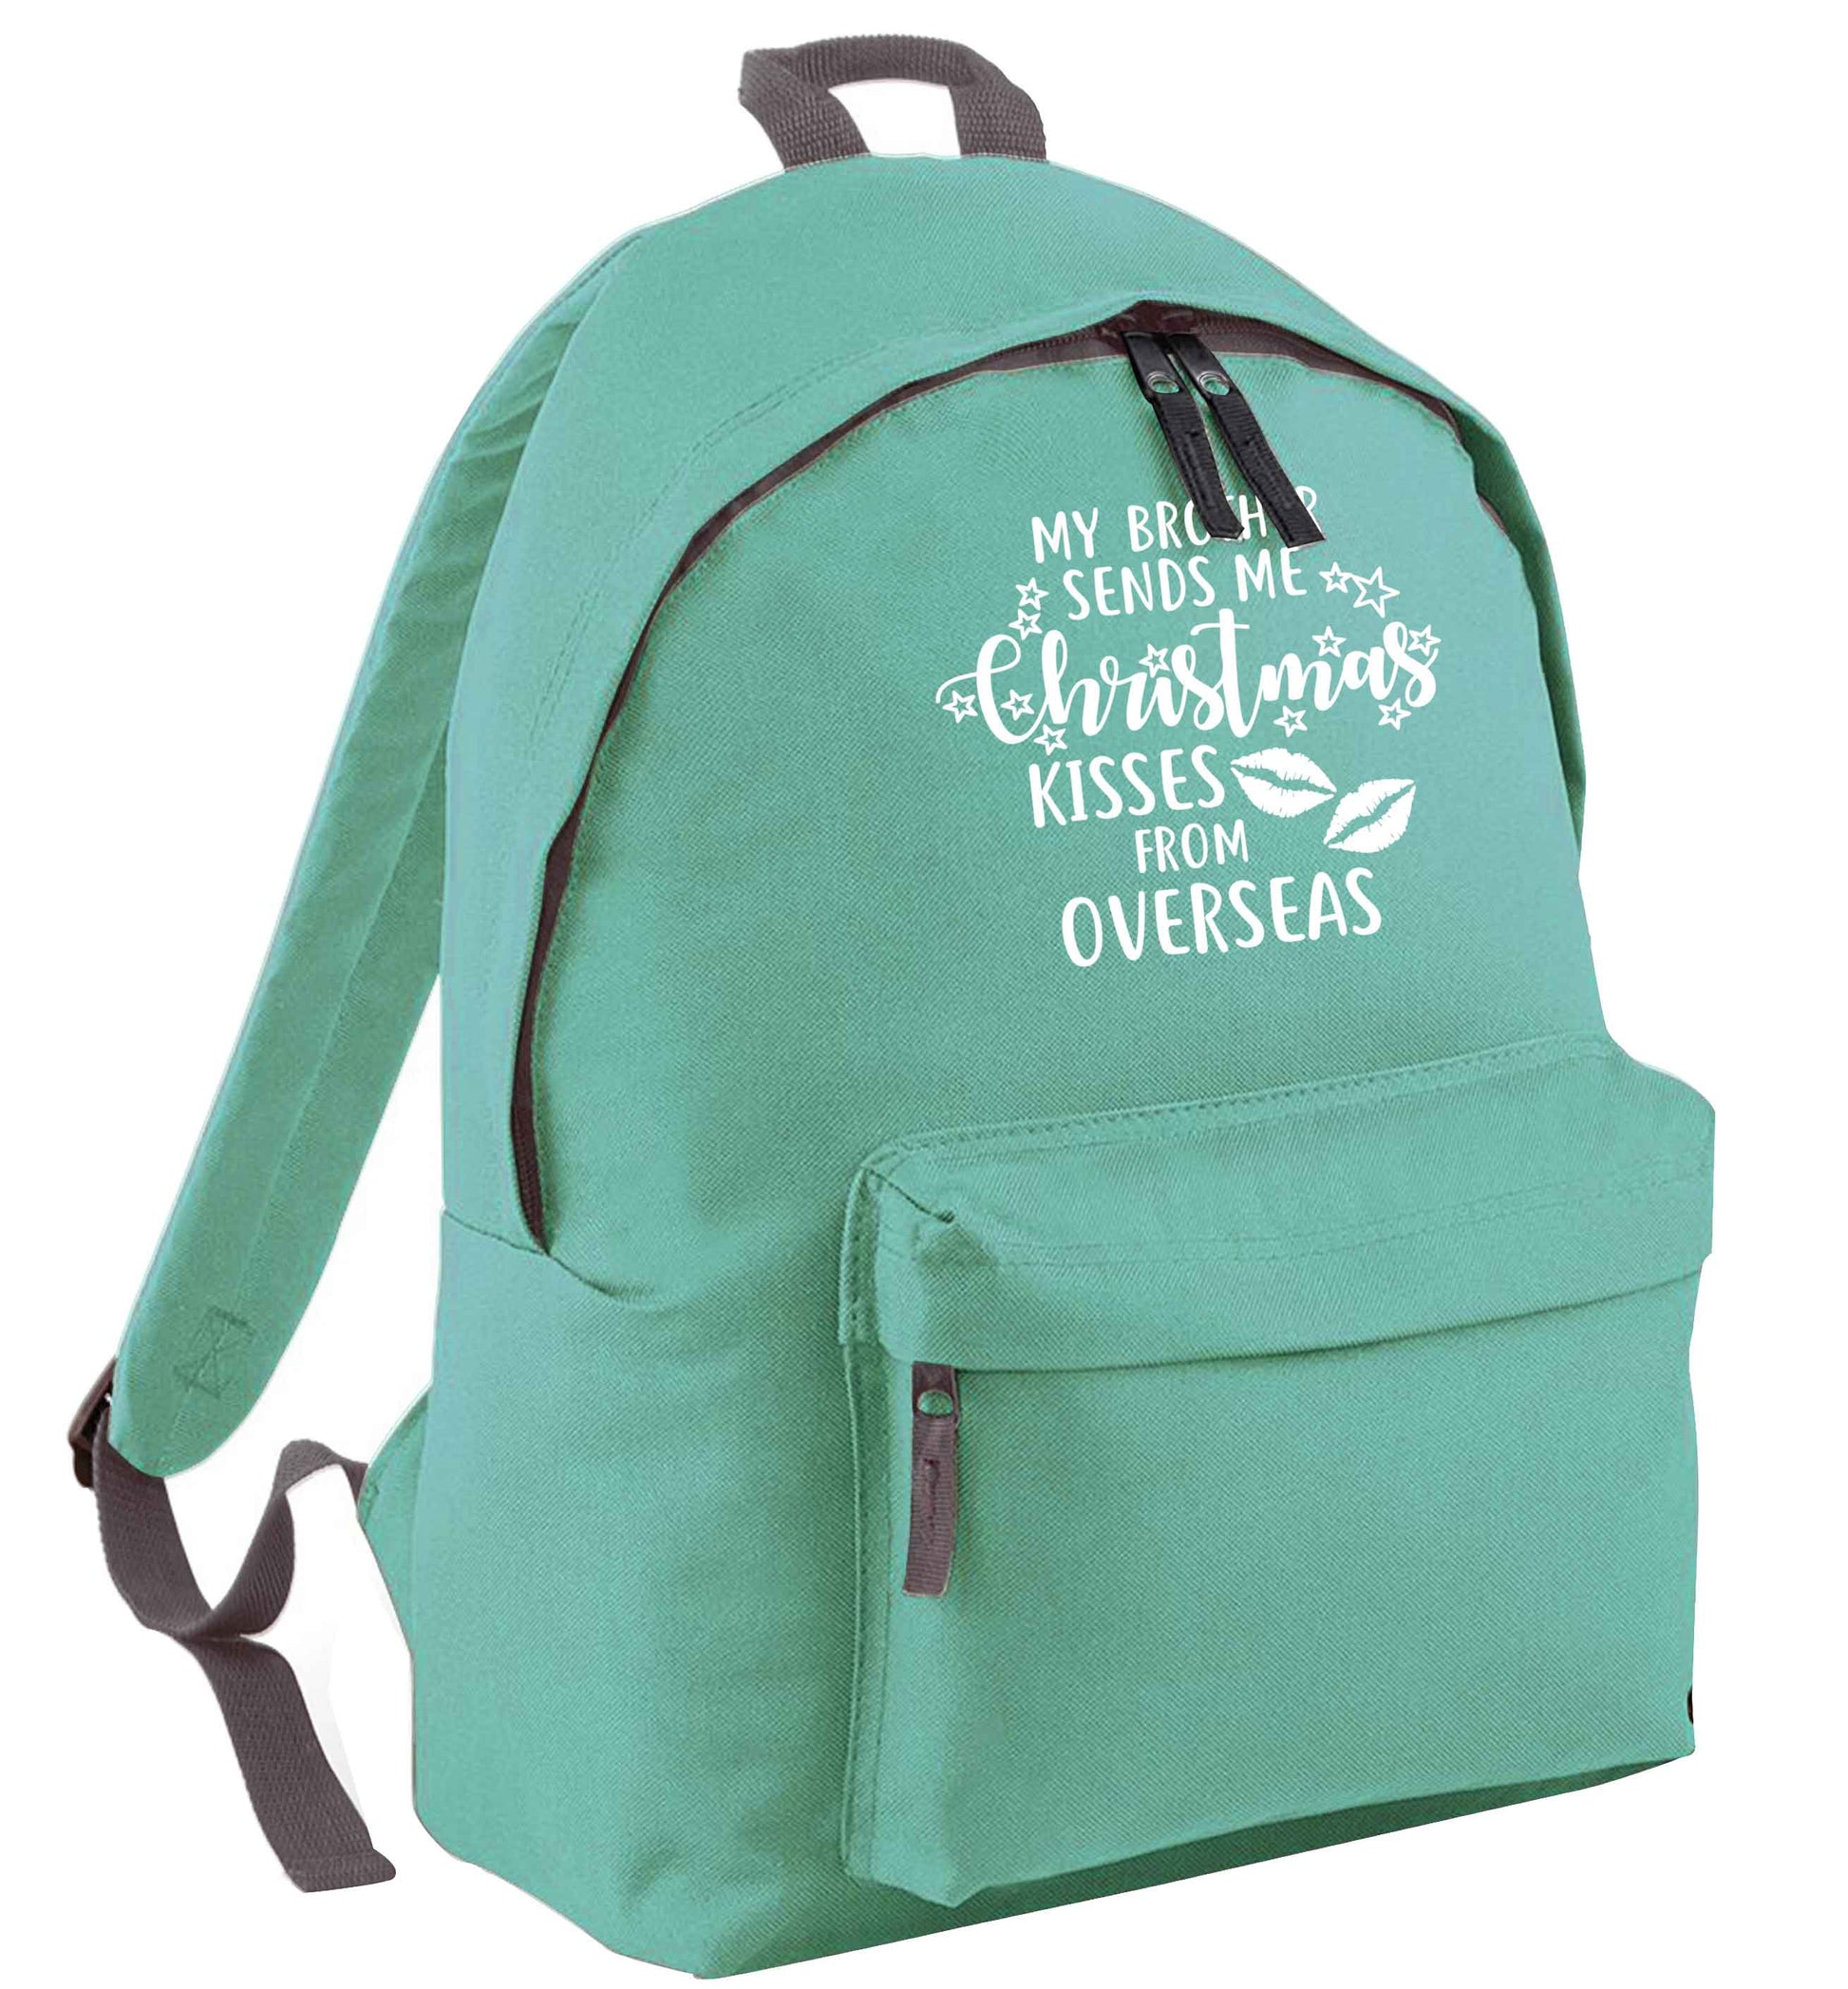 Brother Christmas Kisses Overseas mint adults backpack